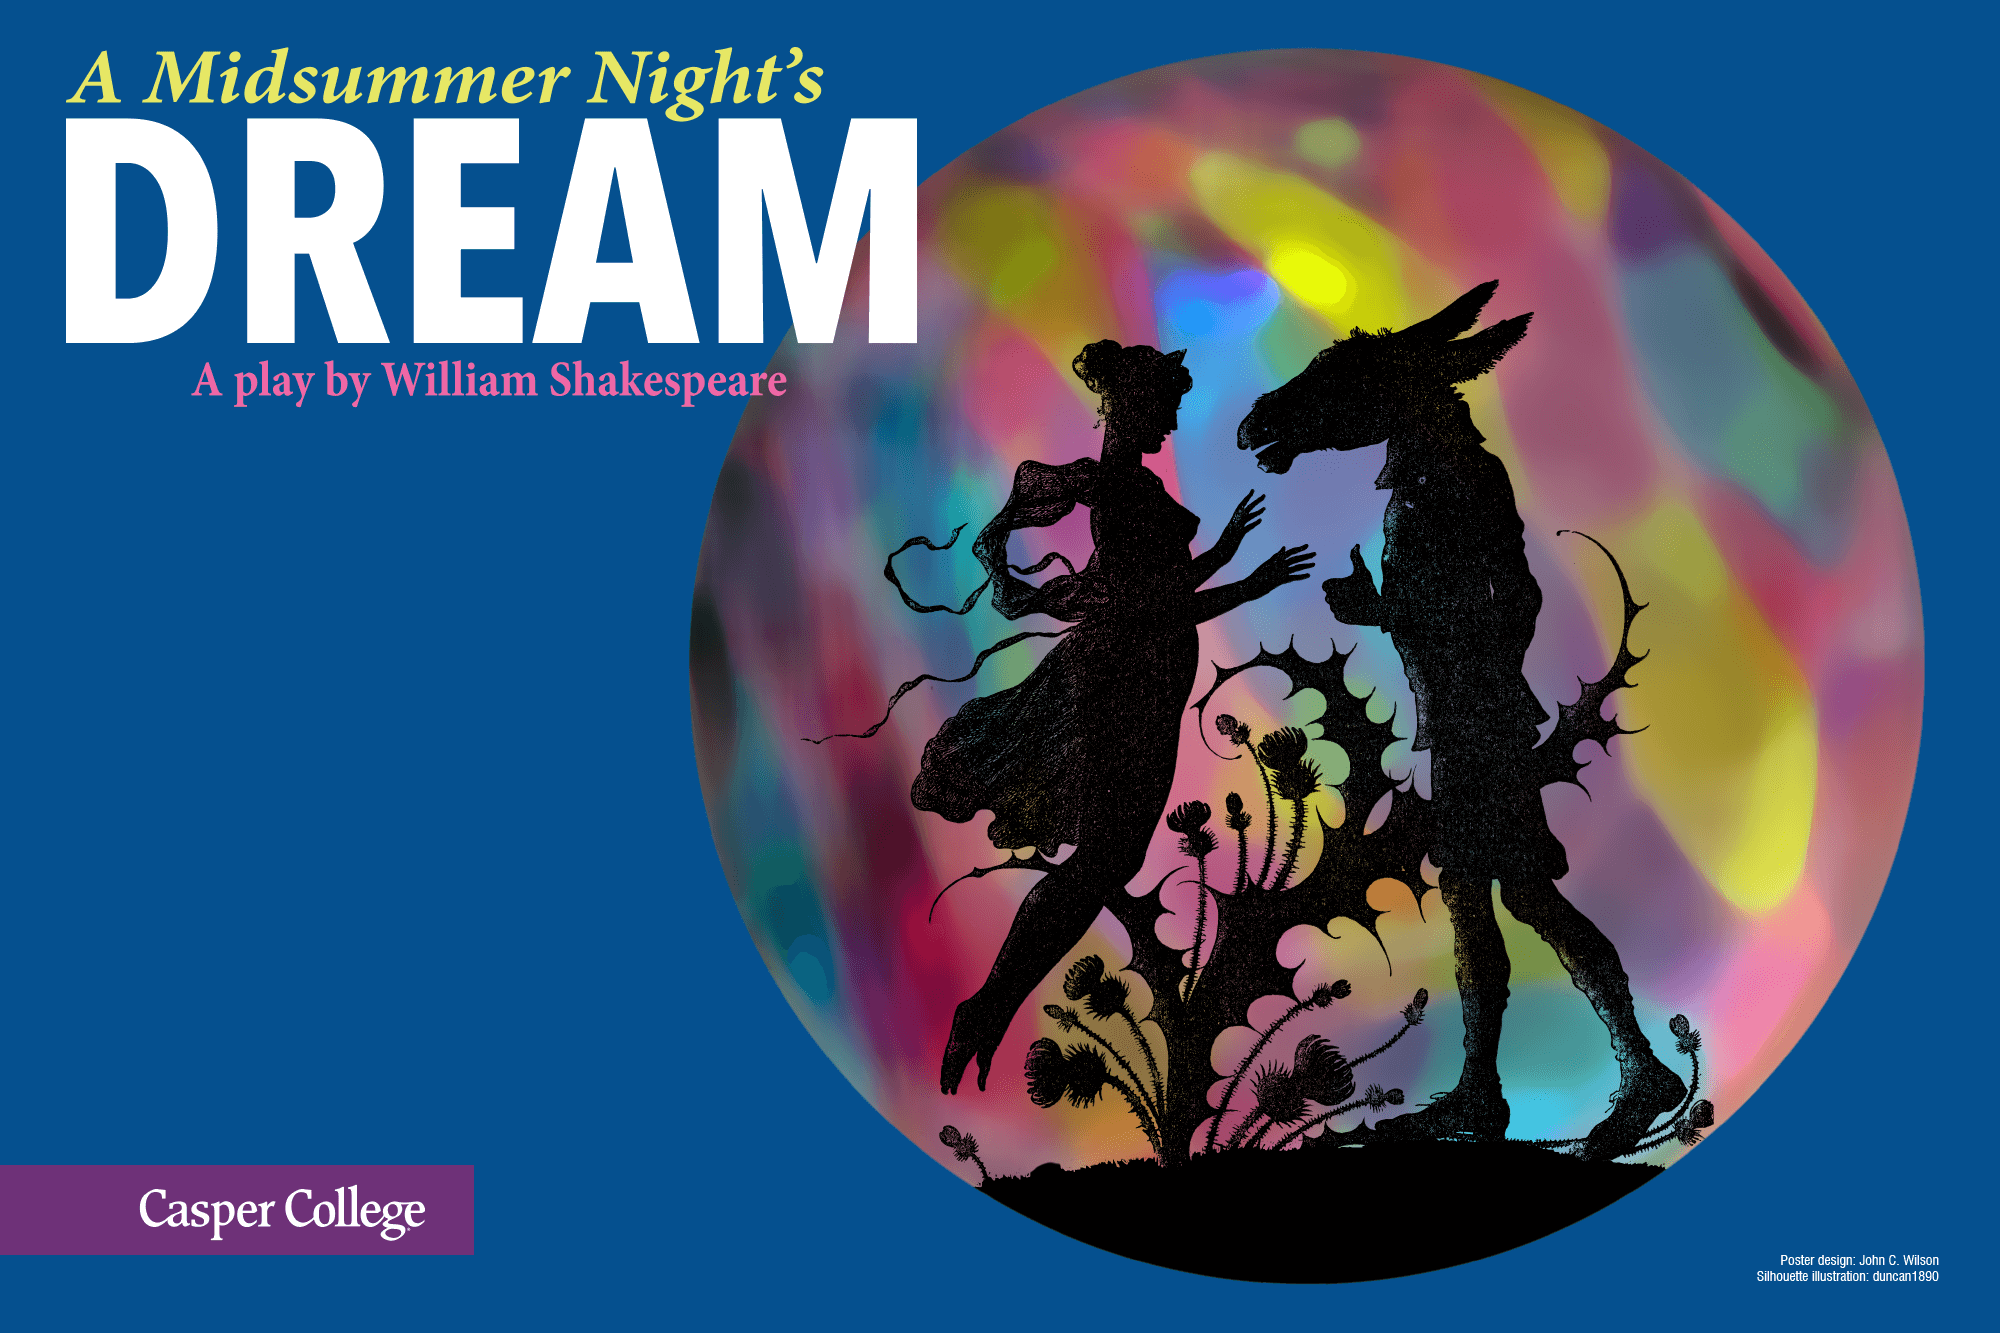 Image for the Casper College production of "A Midsummer Night's Dream."